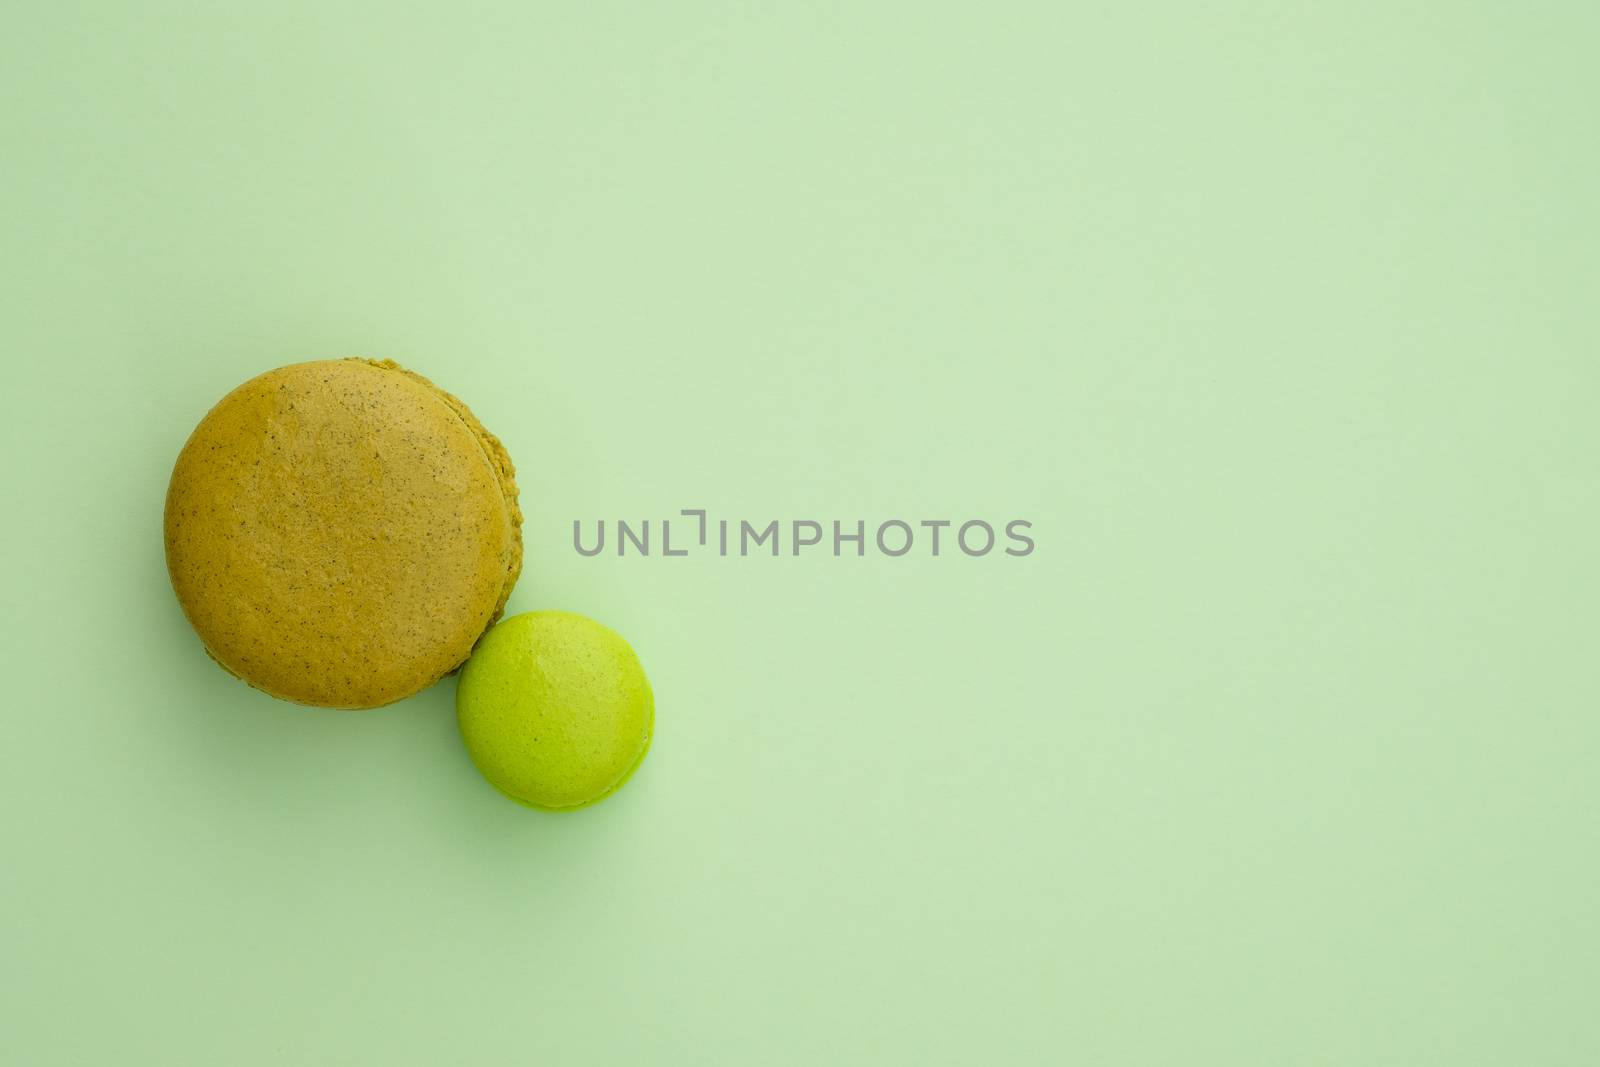 Macaroon on a green background. Top view, Space to write at right.